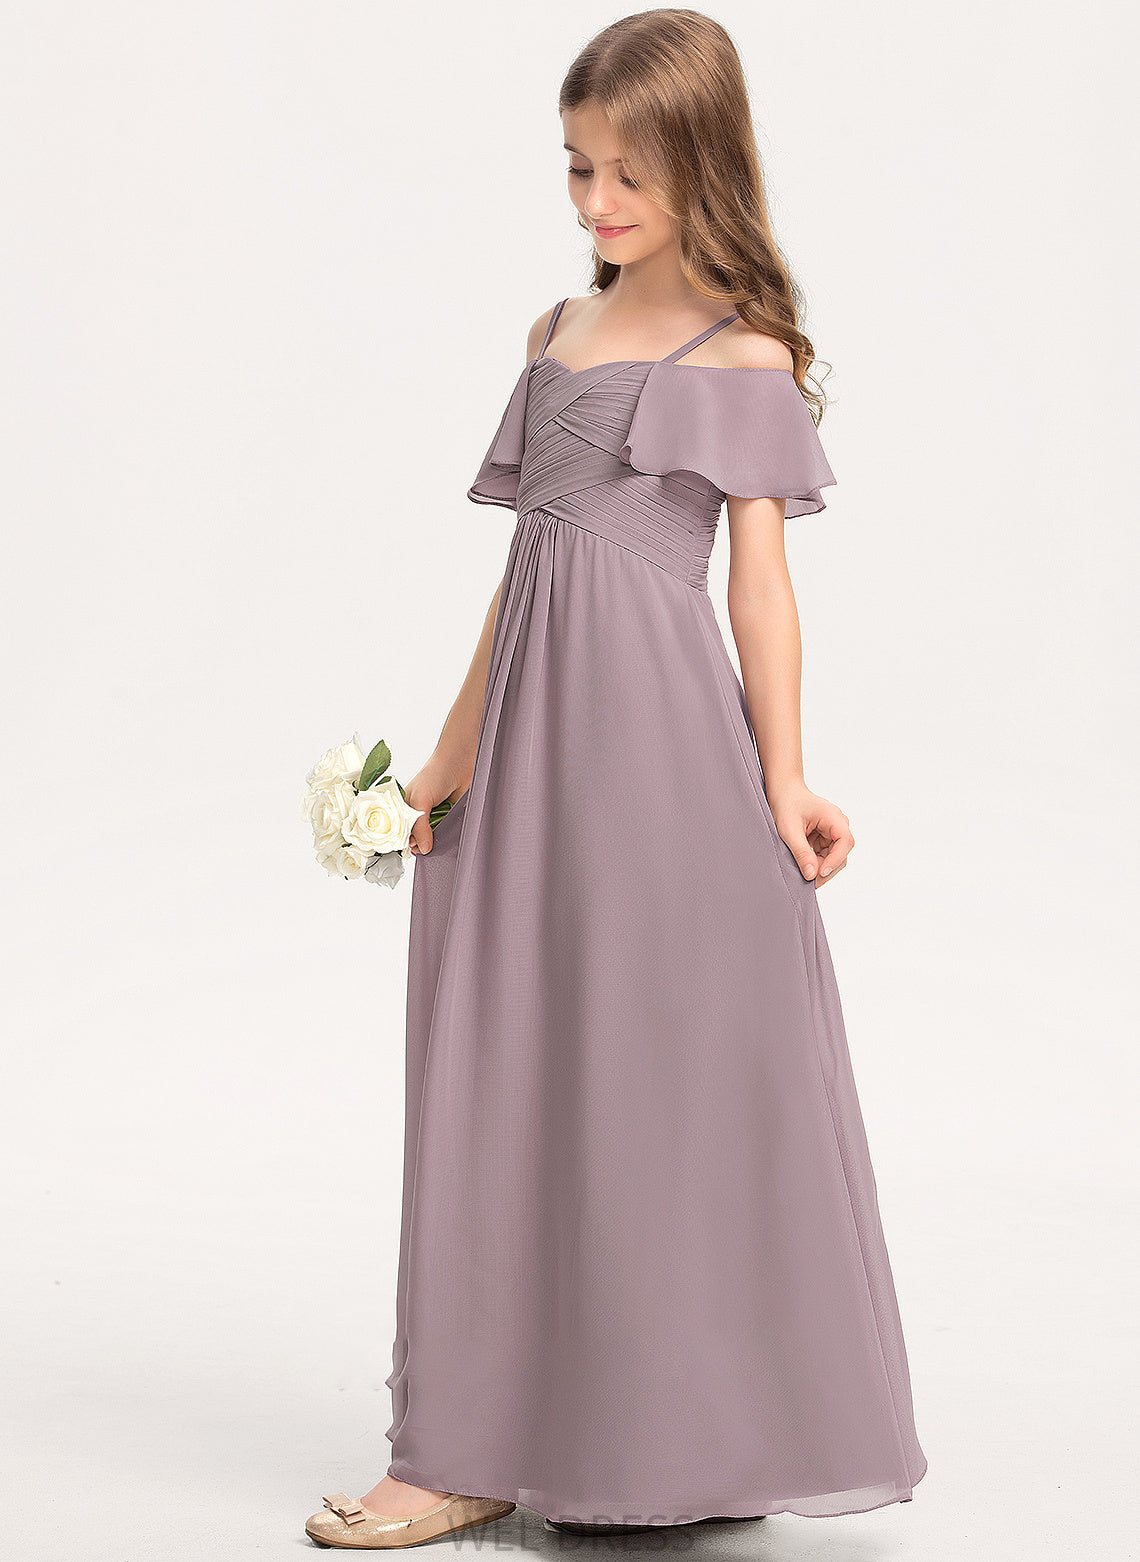 A-Line Junior Bridesmaid Dresses Floor-Length Ruffle With Chiffon Off-the-Shoulder Campbell